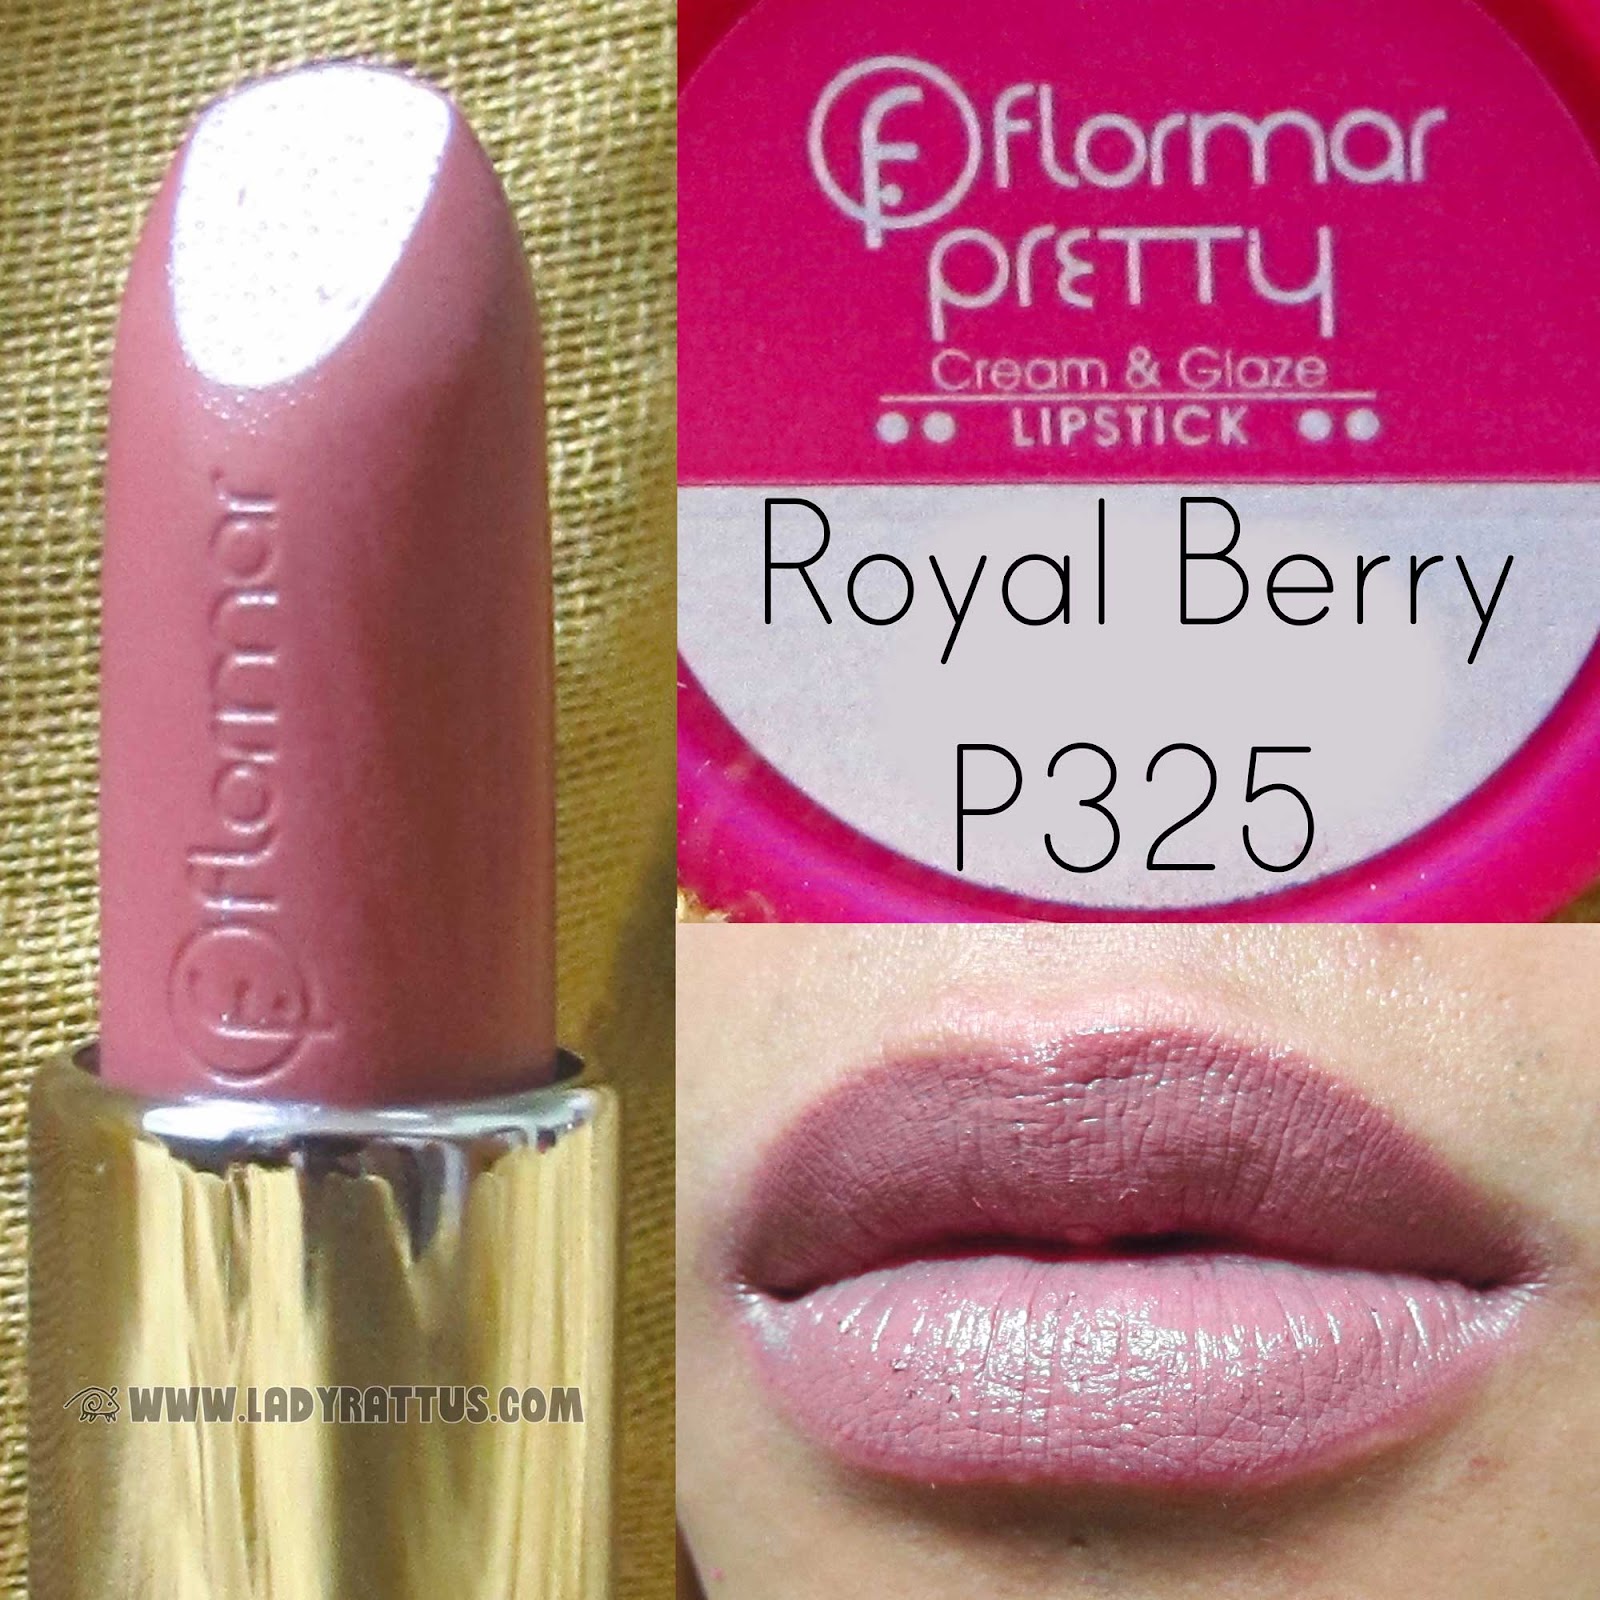 Flormar Cream/Glaze Lipstick in Royal Berry and Fiesta Red